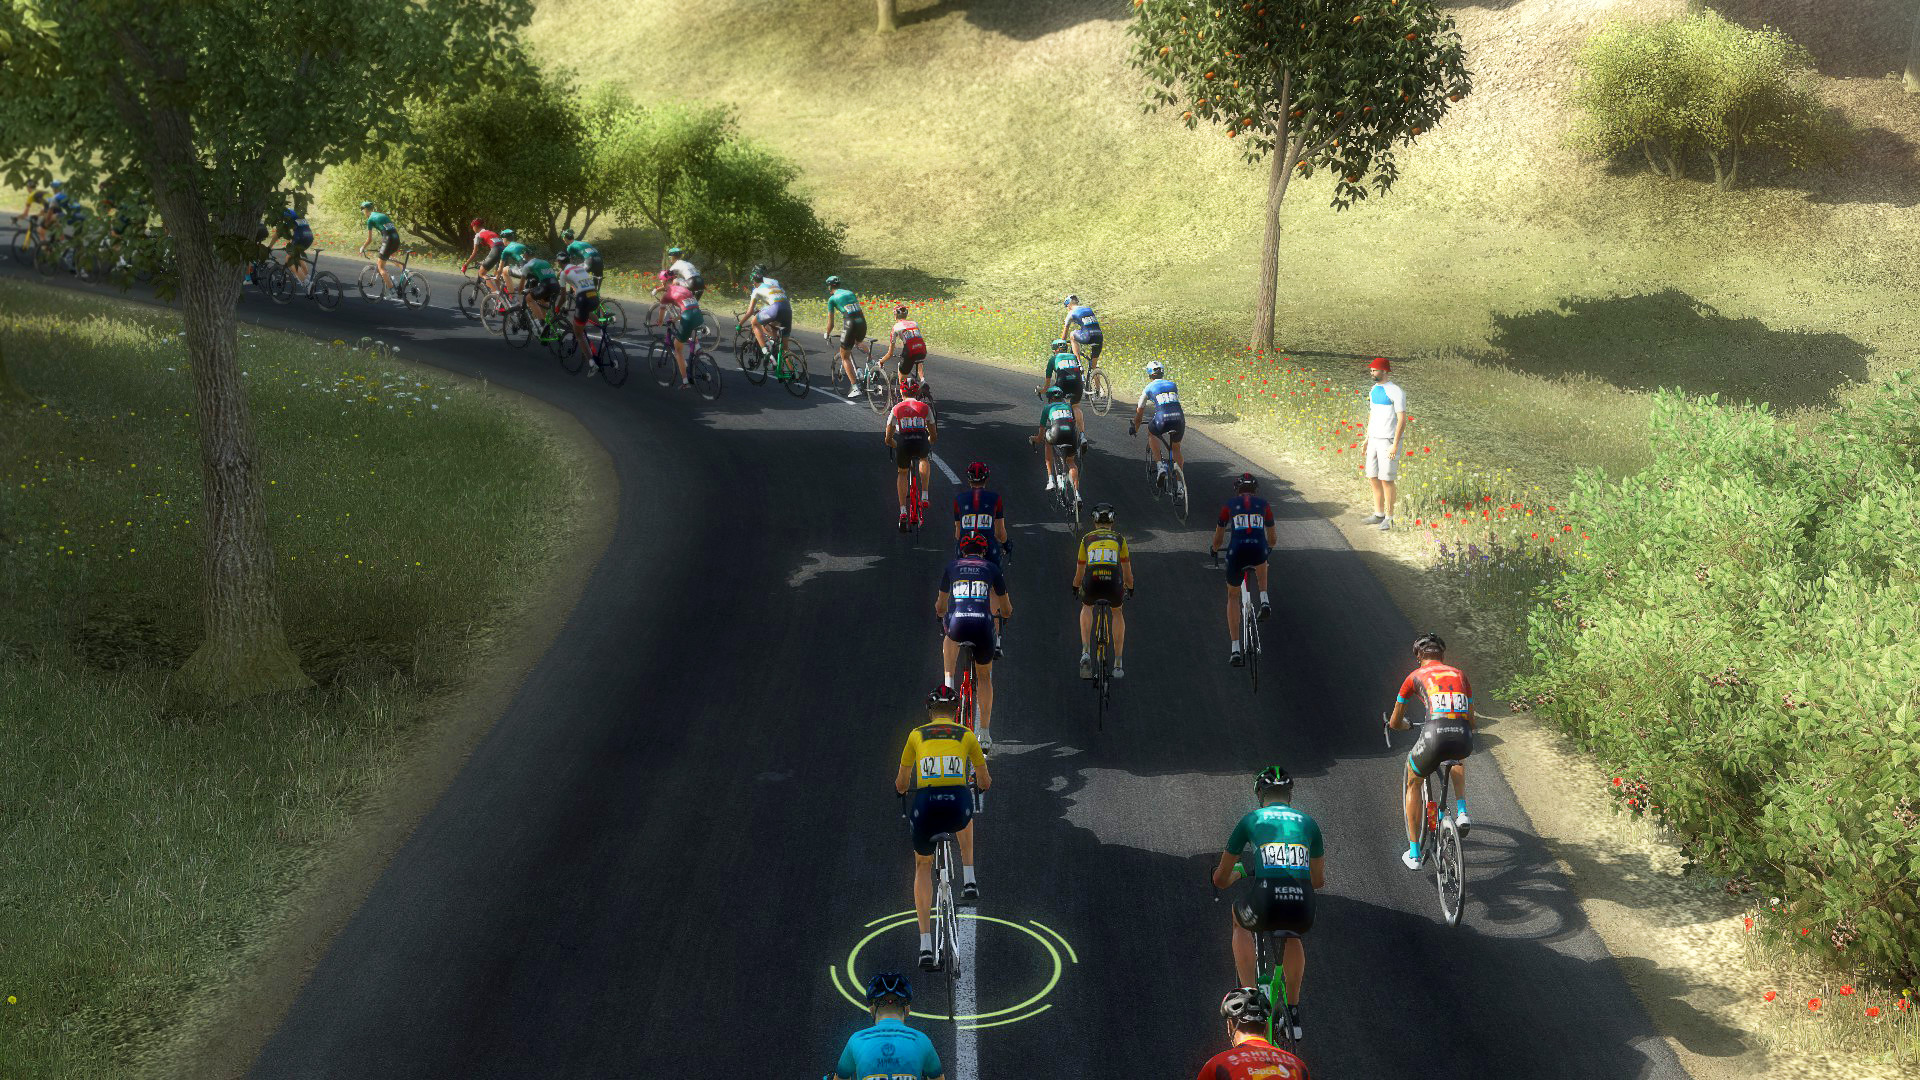 Pro Cycling Manager 2021 Free Download v1.0.3.2 - Steam-Repacks